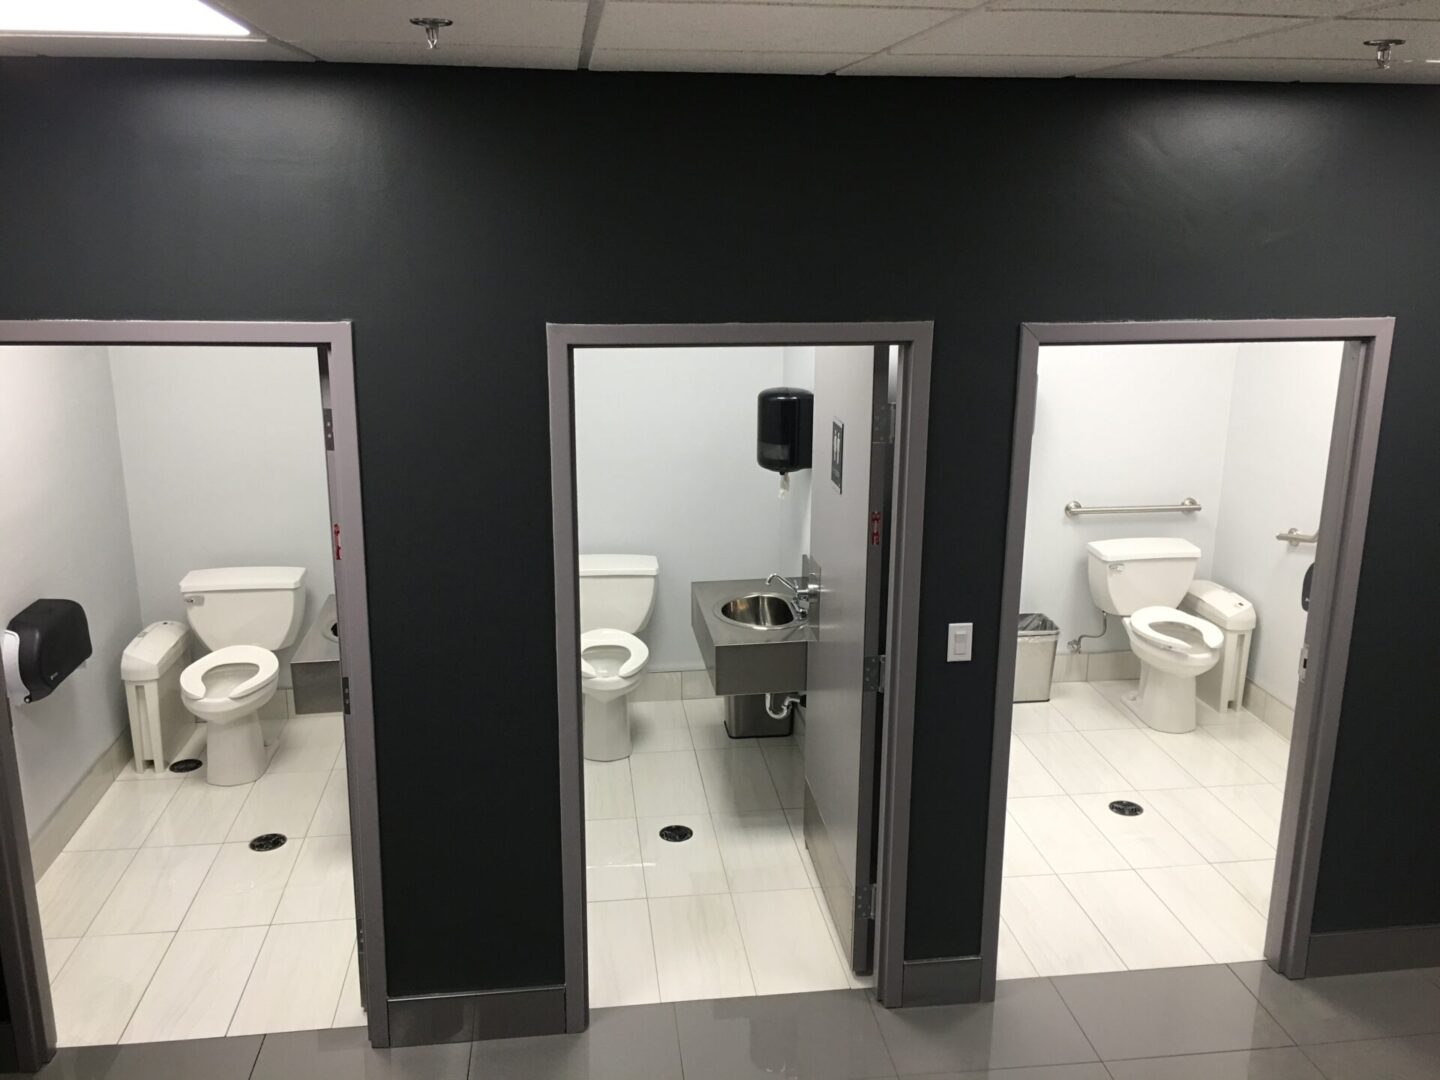 A bathroom with two toilets and three sinks.